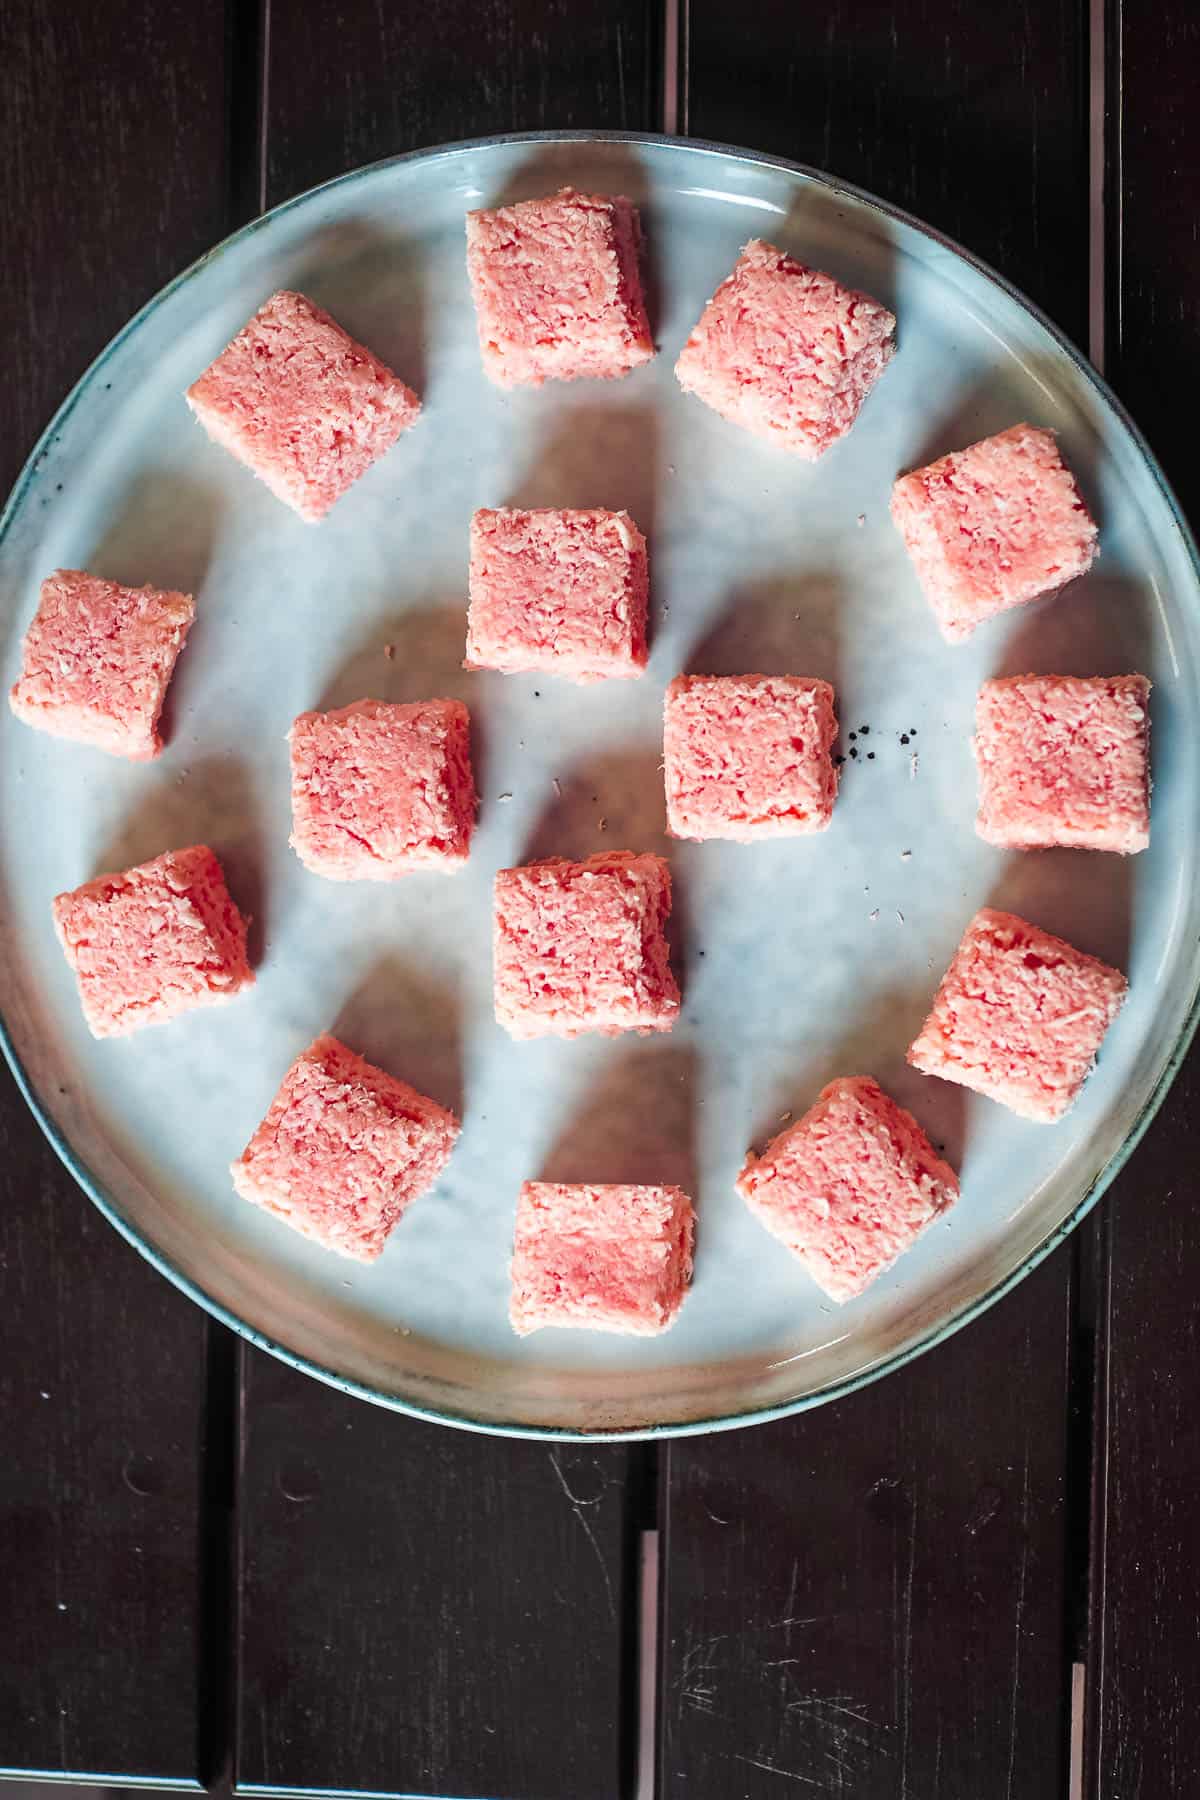 Blocks of coconut candy in pink on a white plate.